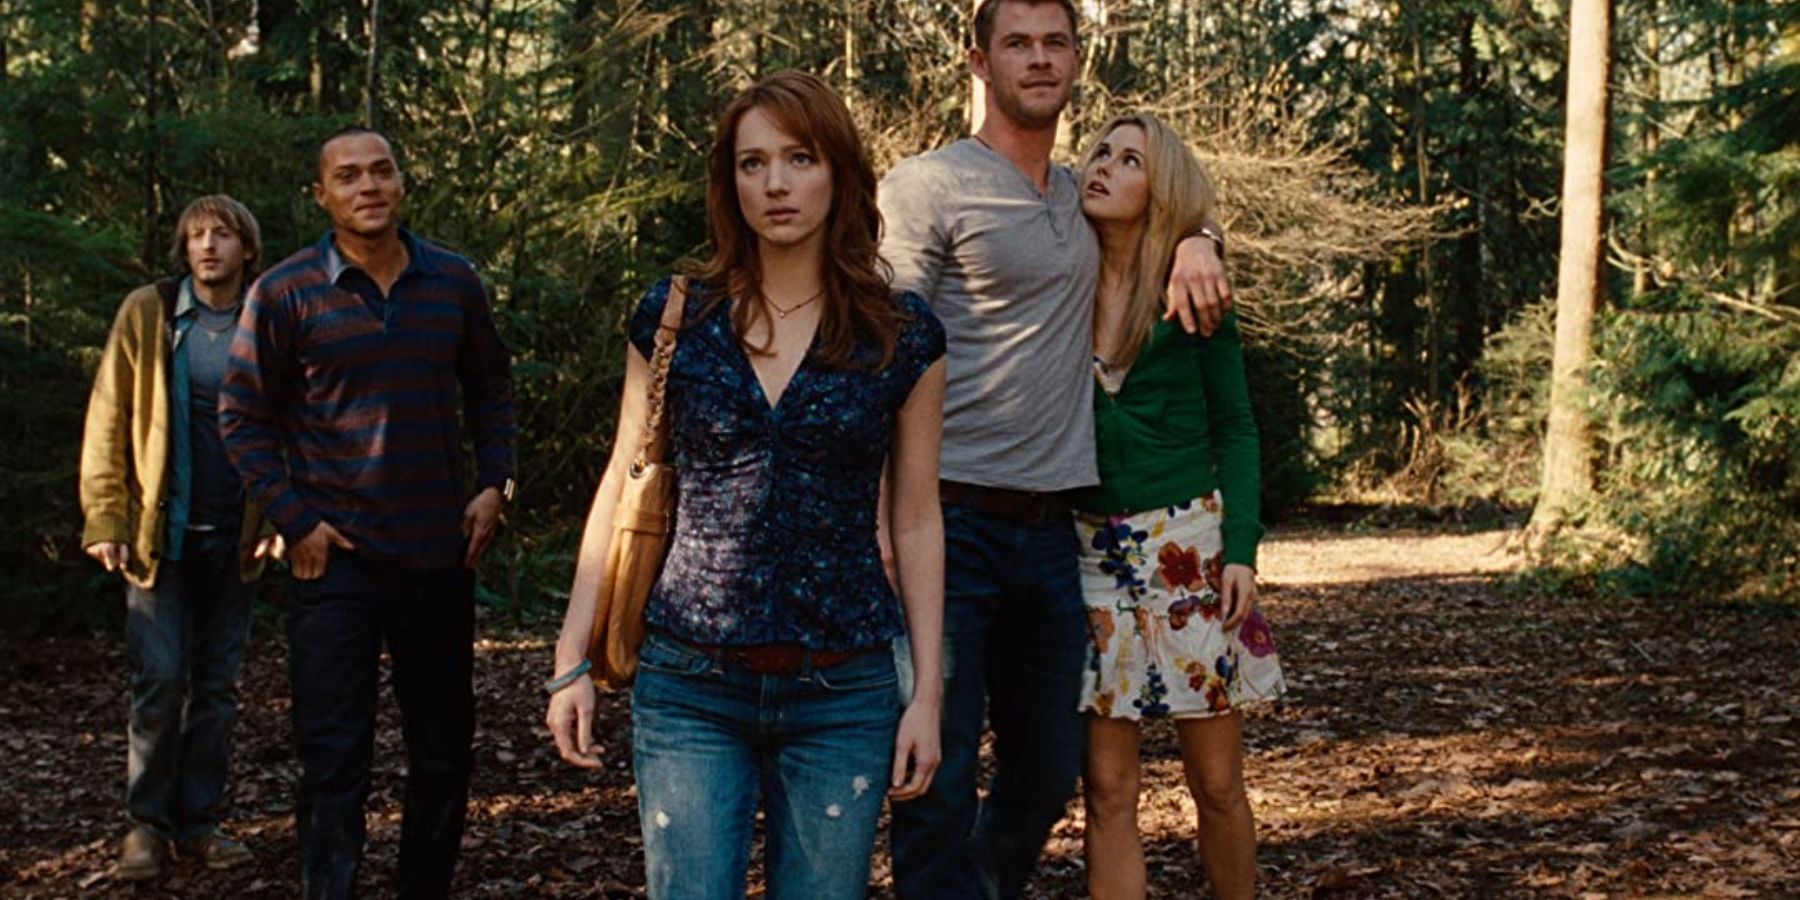 The Cabin In The Woods Ending, Explained